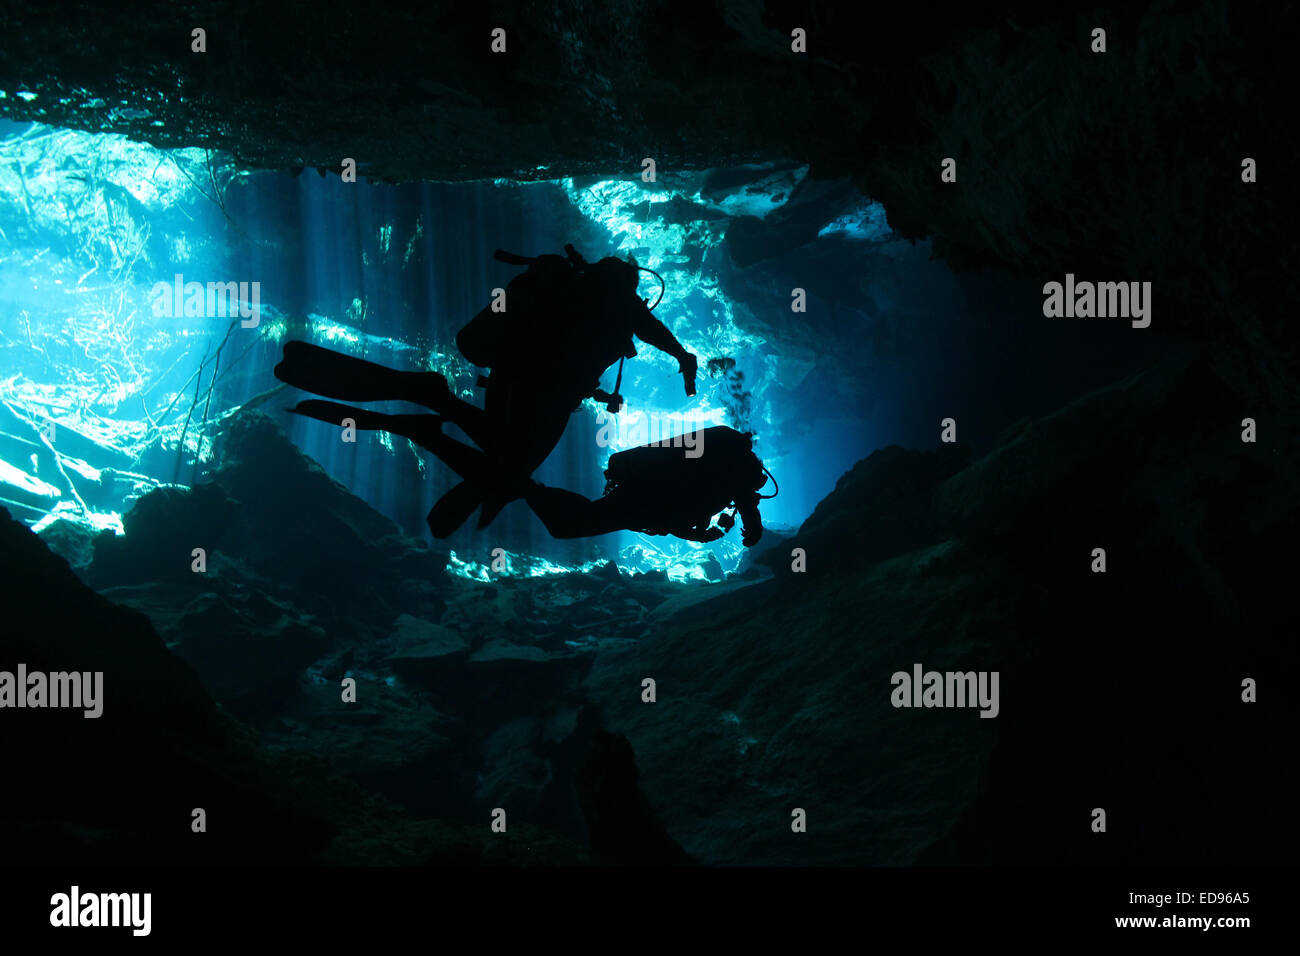 Divers in Chacmool Cenote, Playa del Carmen, Mexico Stock Photo